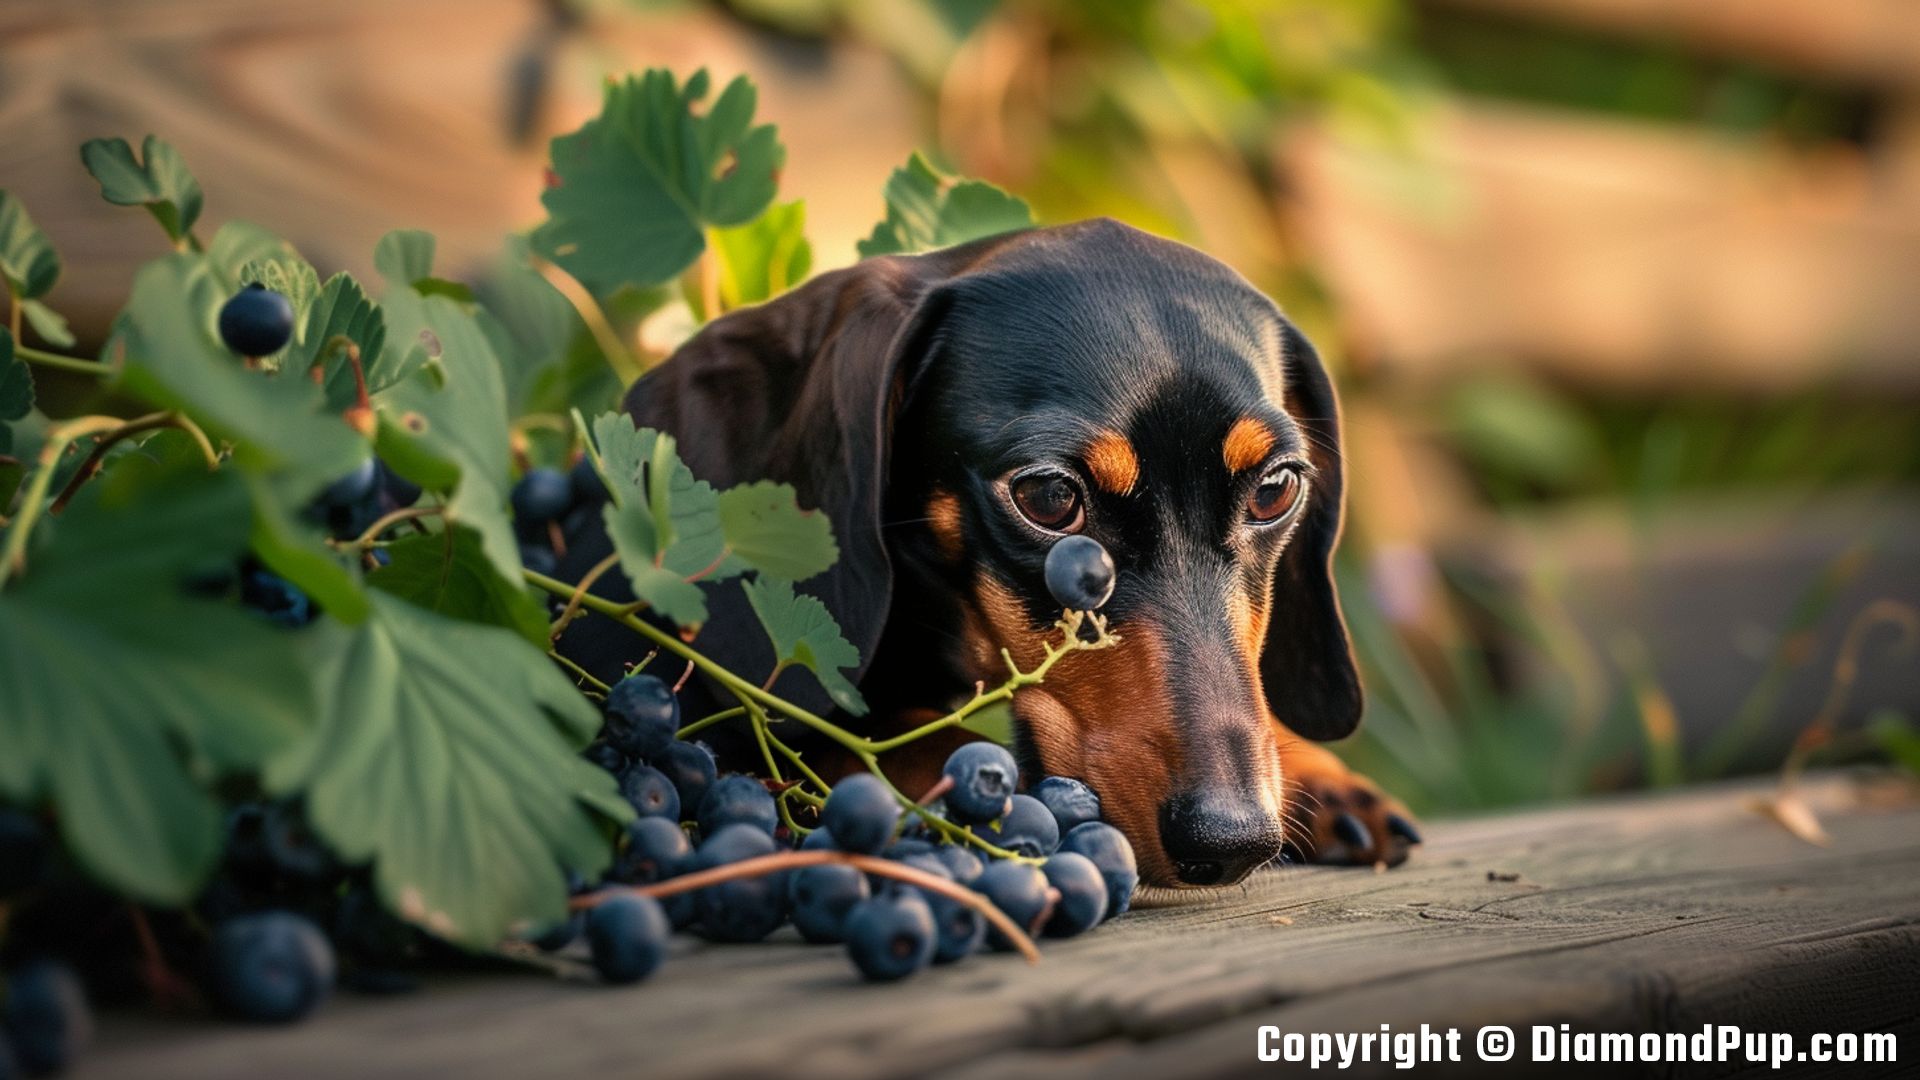 Photo of a Playful Dachshund Eating Blueberries